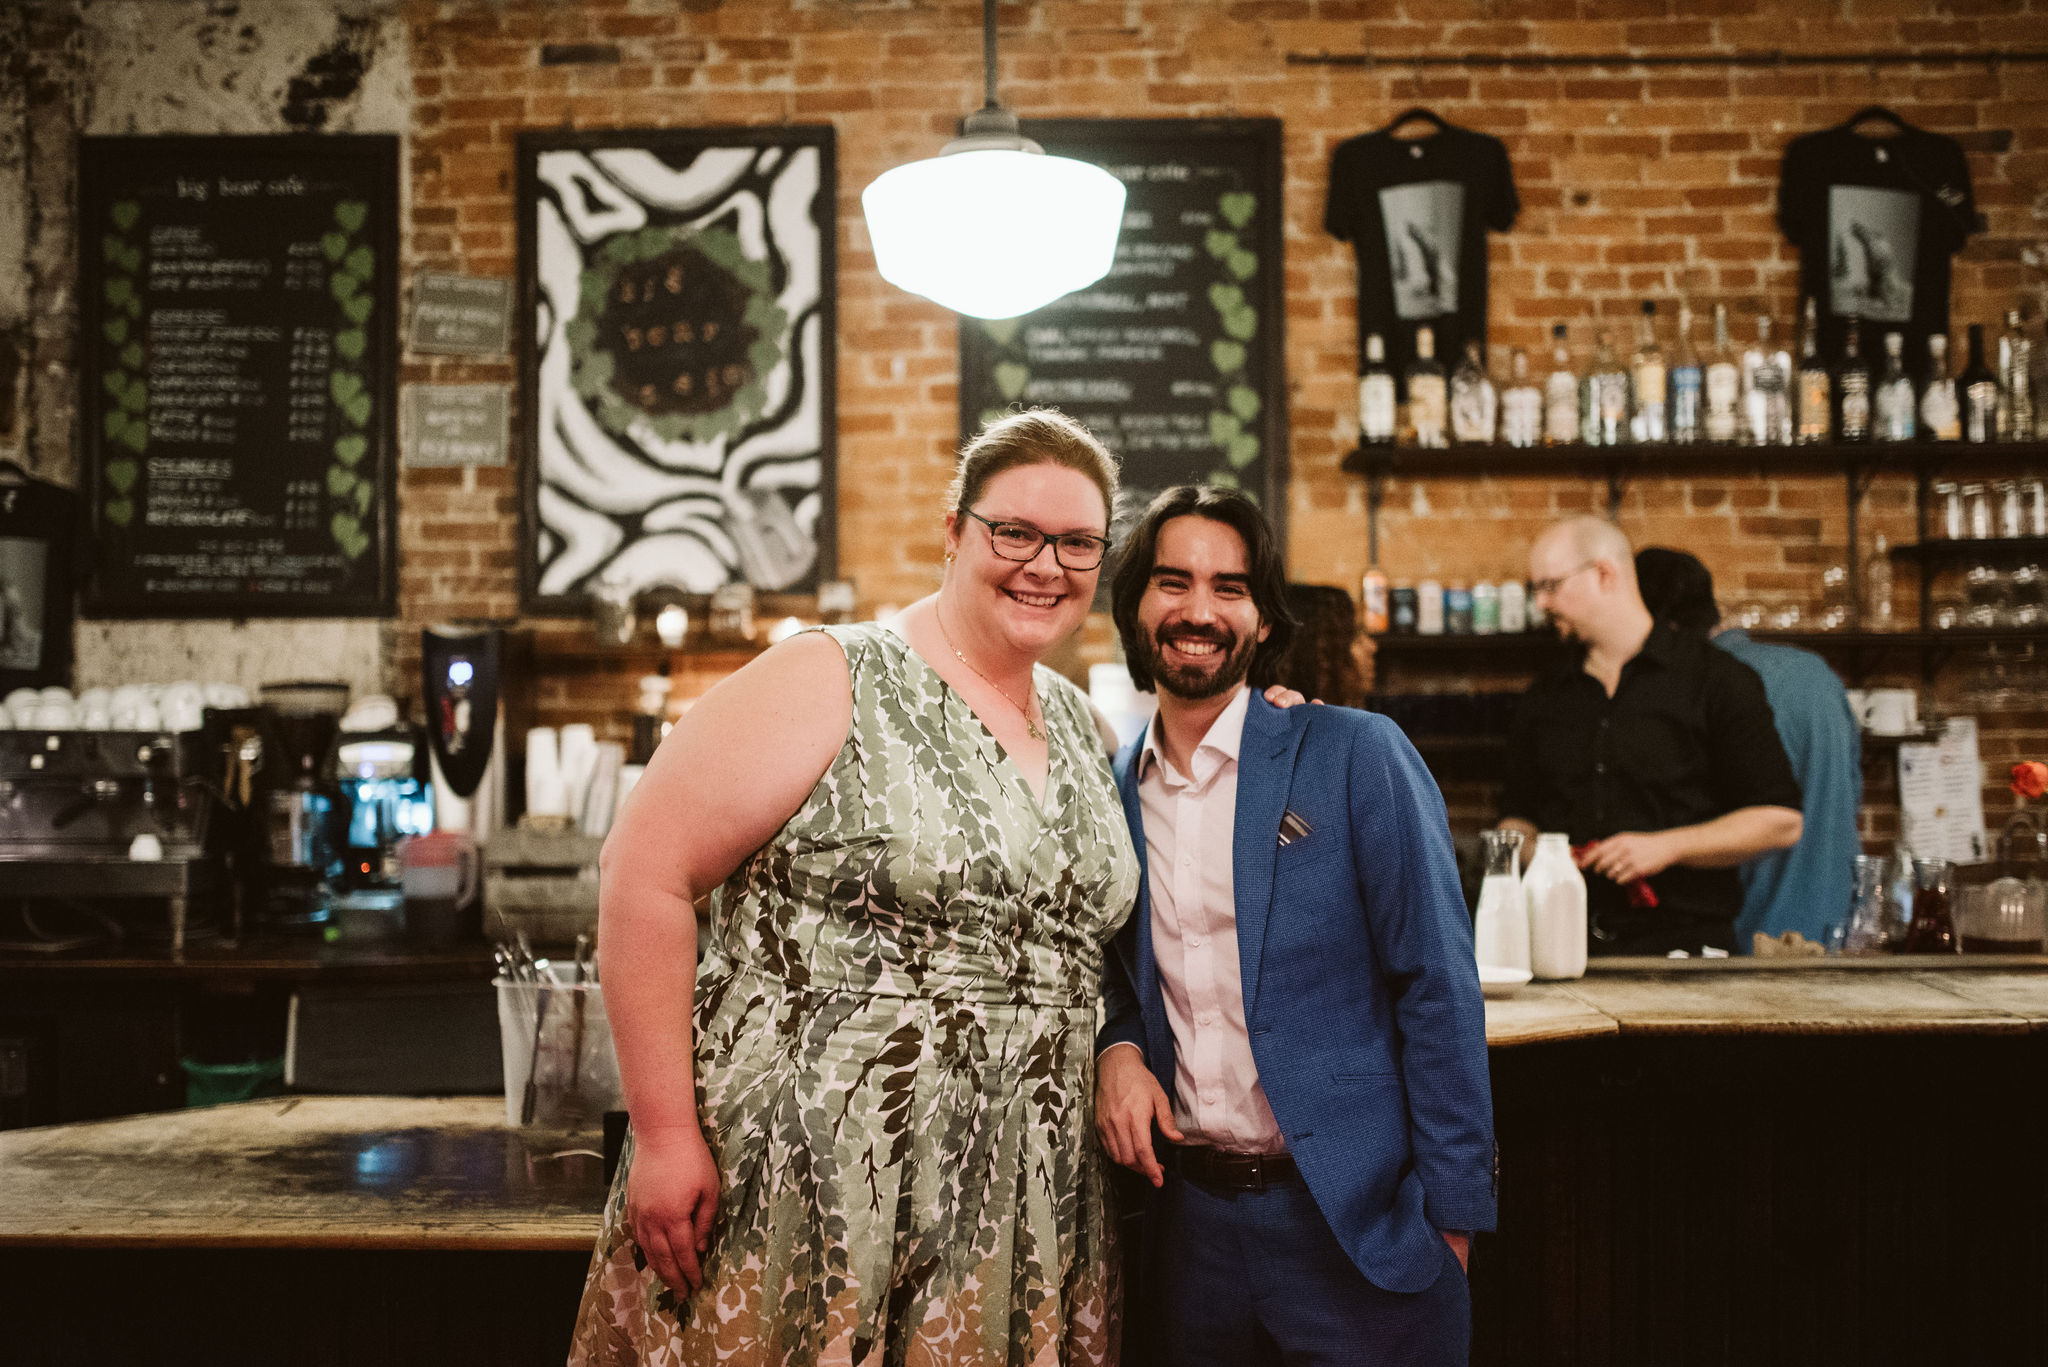  Washington DC, Baltimore Wedding Photographer, Intimate Wedding, Traditional, Classic, Big Bear Cafe, Portrait of Groom with Friend at Reception 